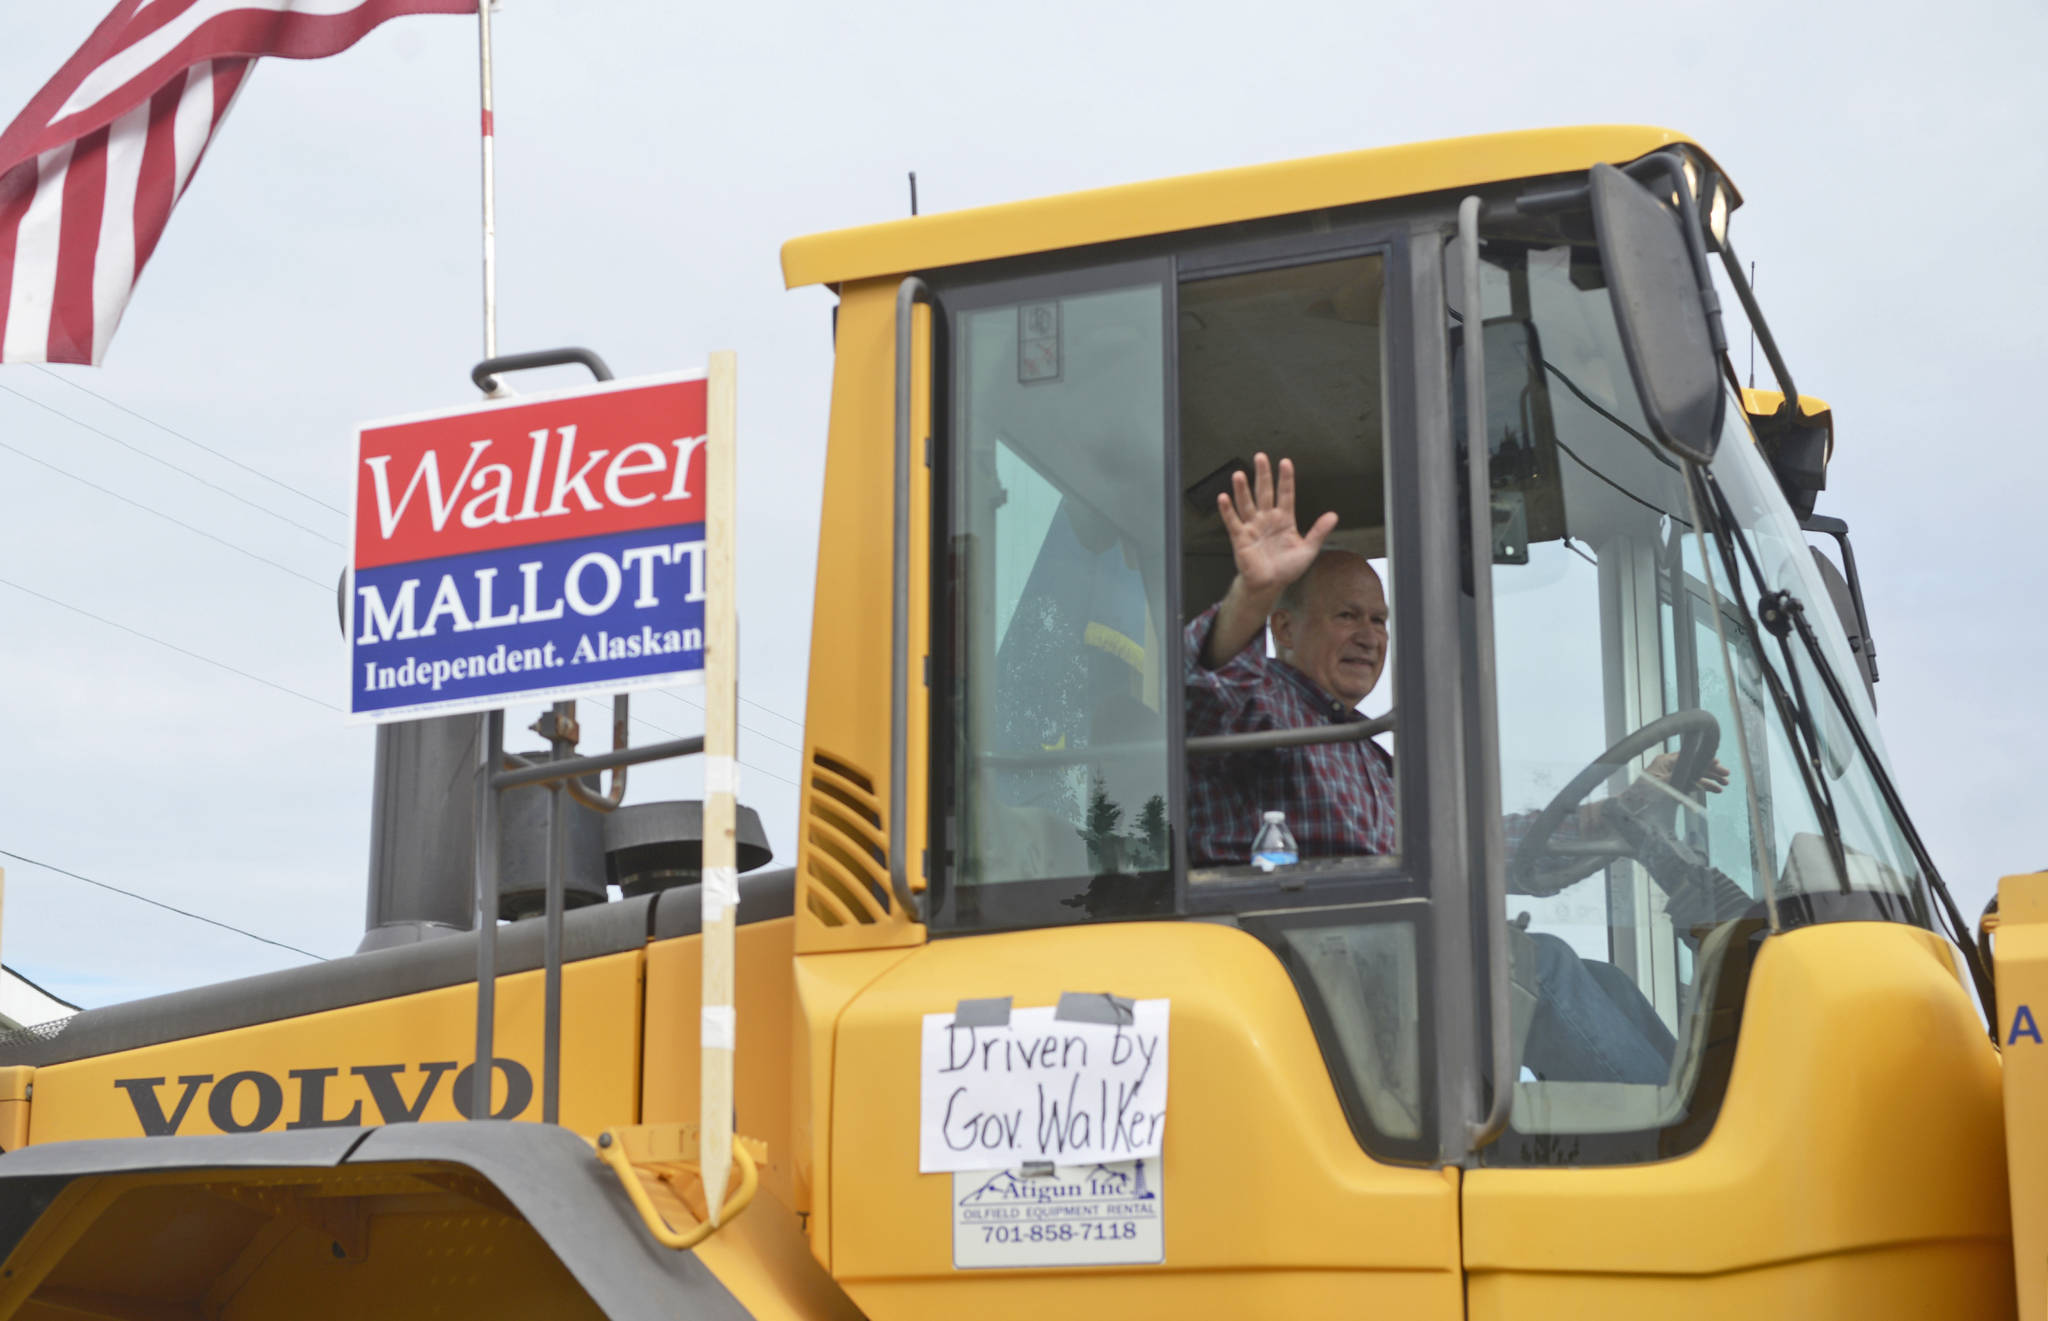 Gov. Bill Walker drives a tractor part of his gubernatorial reelection campaign float in the Progress Days parade down Marydale Avenue on Saturday, July 28, 2018 in Soldotna, Alaska. The parade kicks off the weekend-long event celebrating Soldotna’s history, with a market on Saturday and Sunday in Soldotna Creek Park and a concert Saturday night followed by a free community barbecue Sunday. (Photo by Elizabeth Earl/Peninsula Clarion)